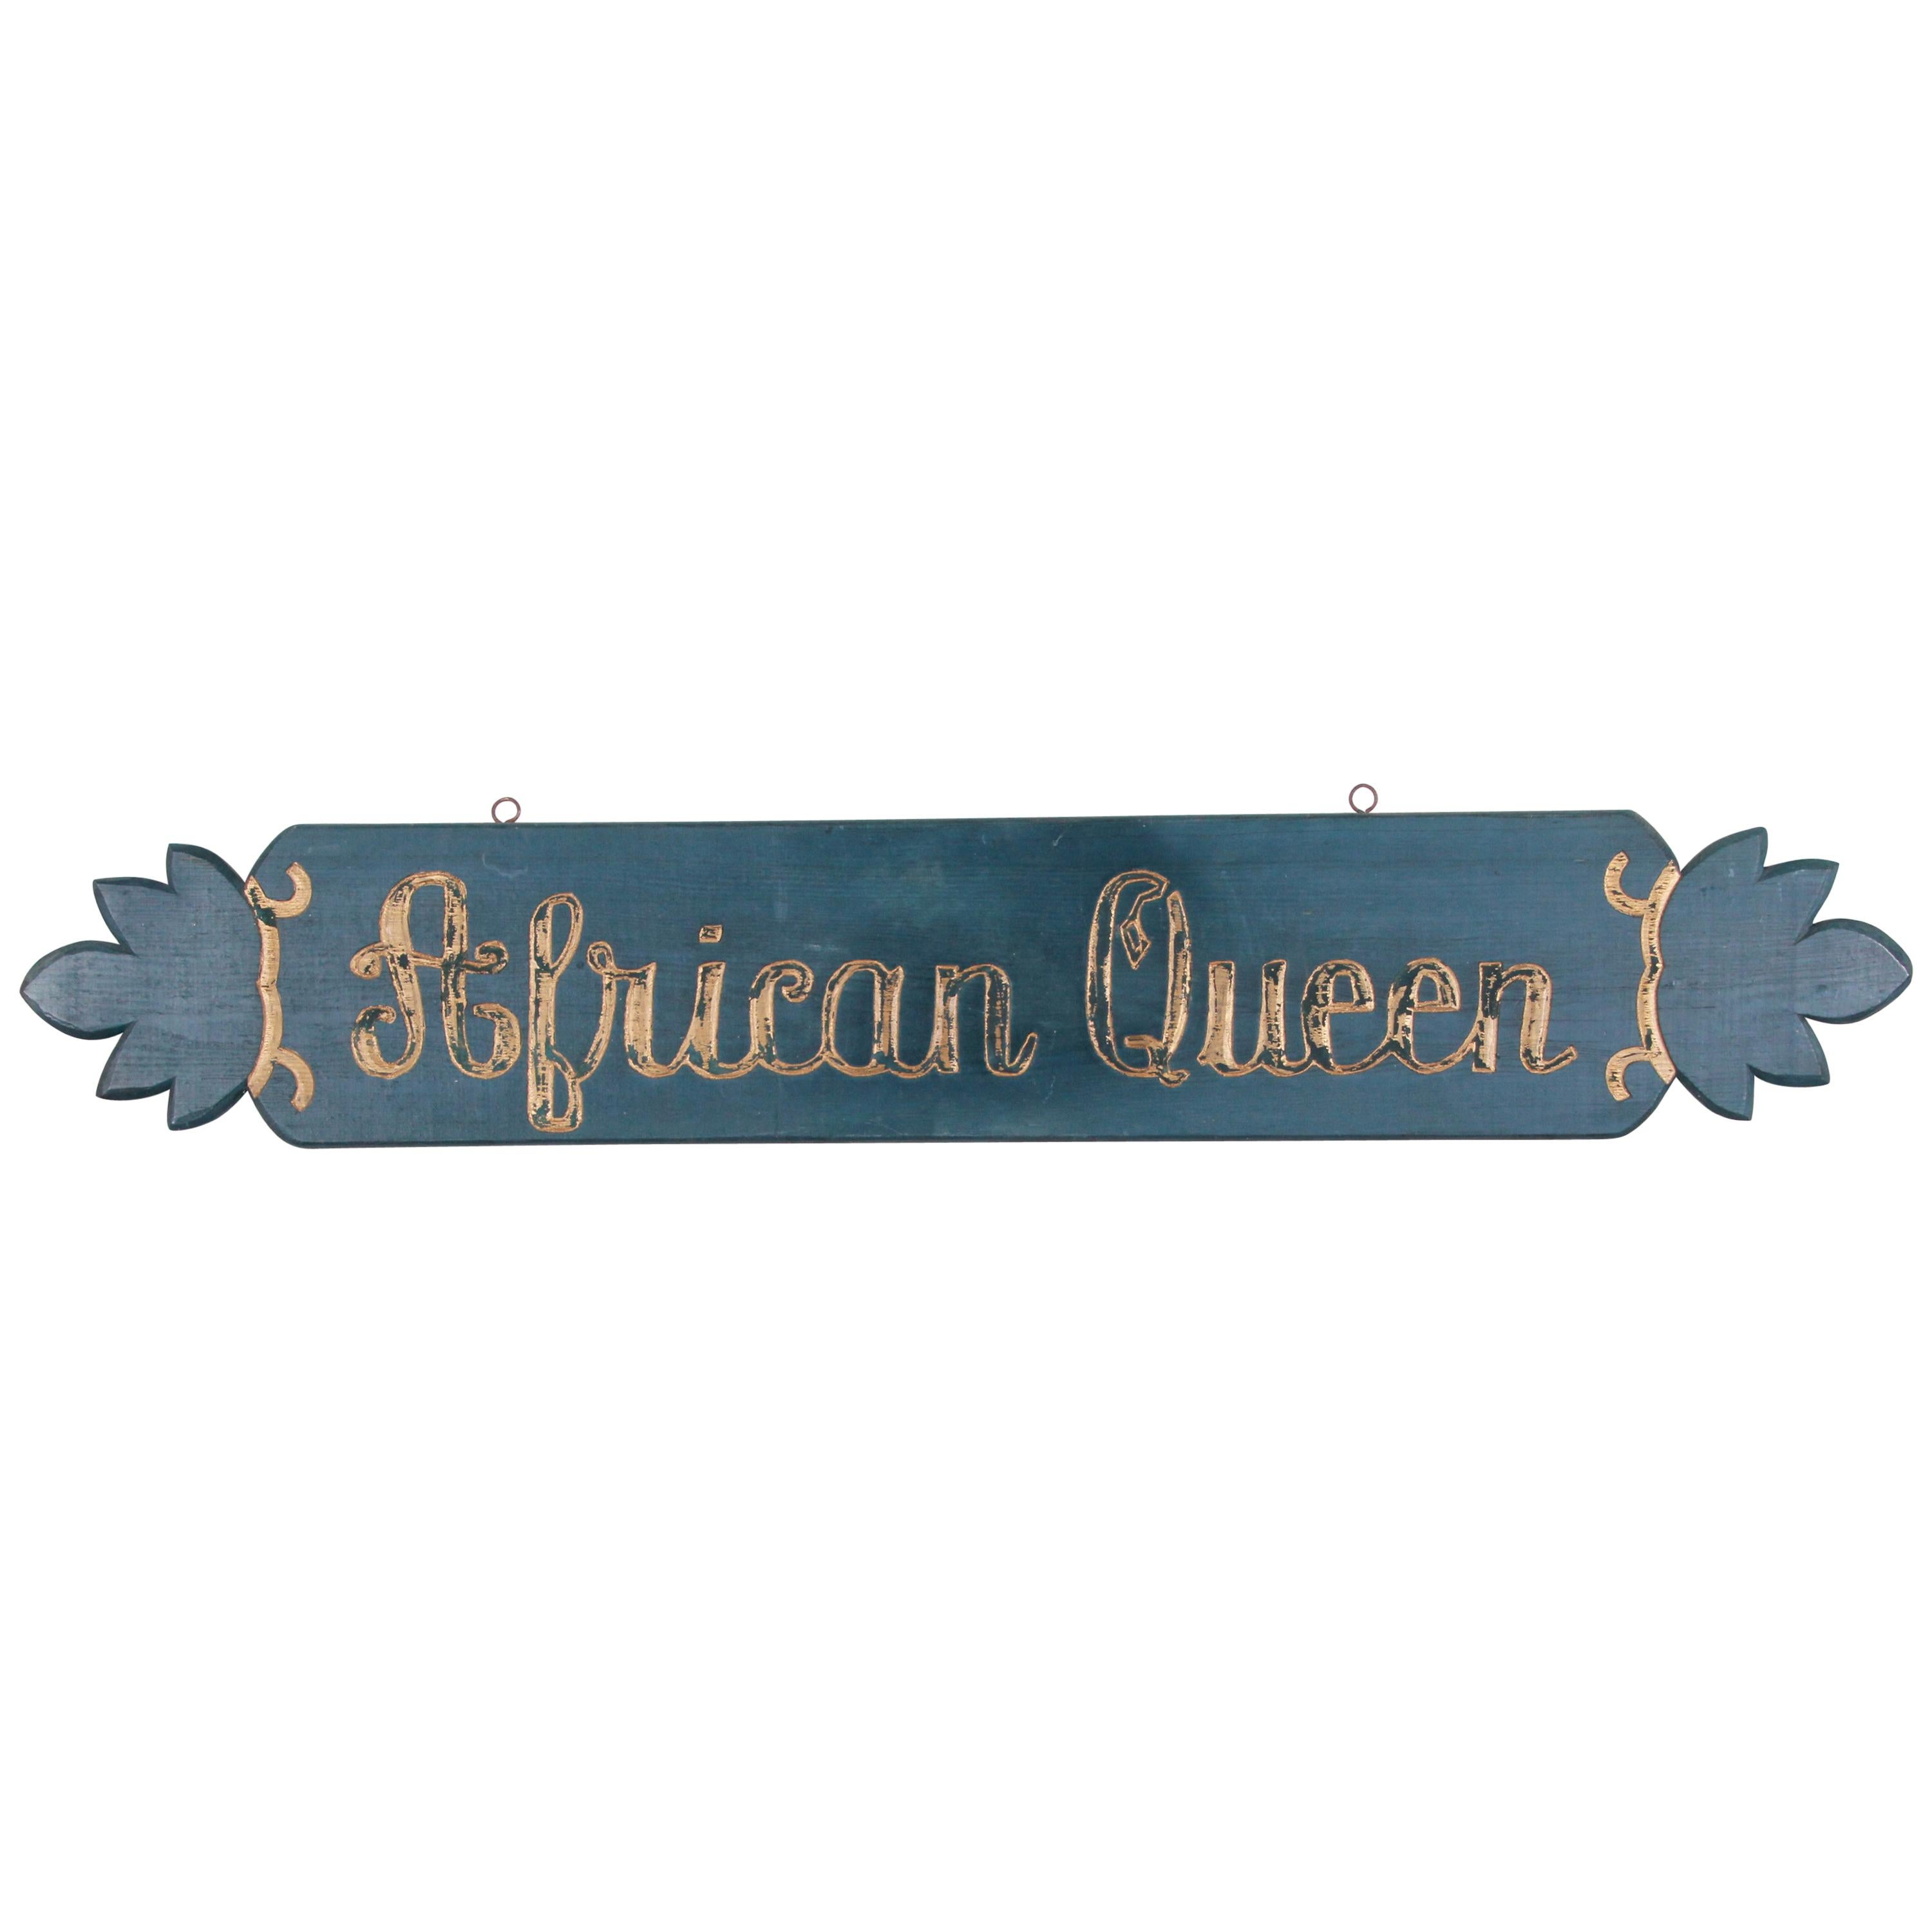 Vintage "African Queen" Boat Name Sign, circa 1950s